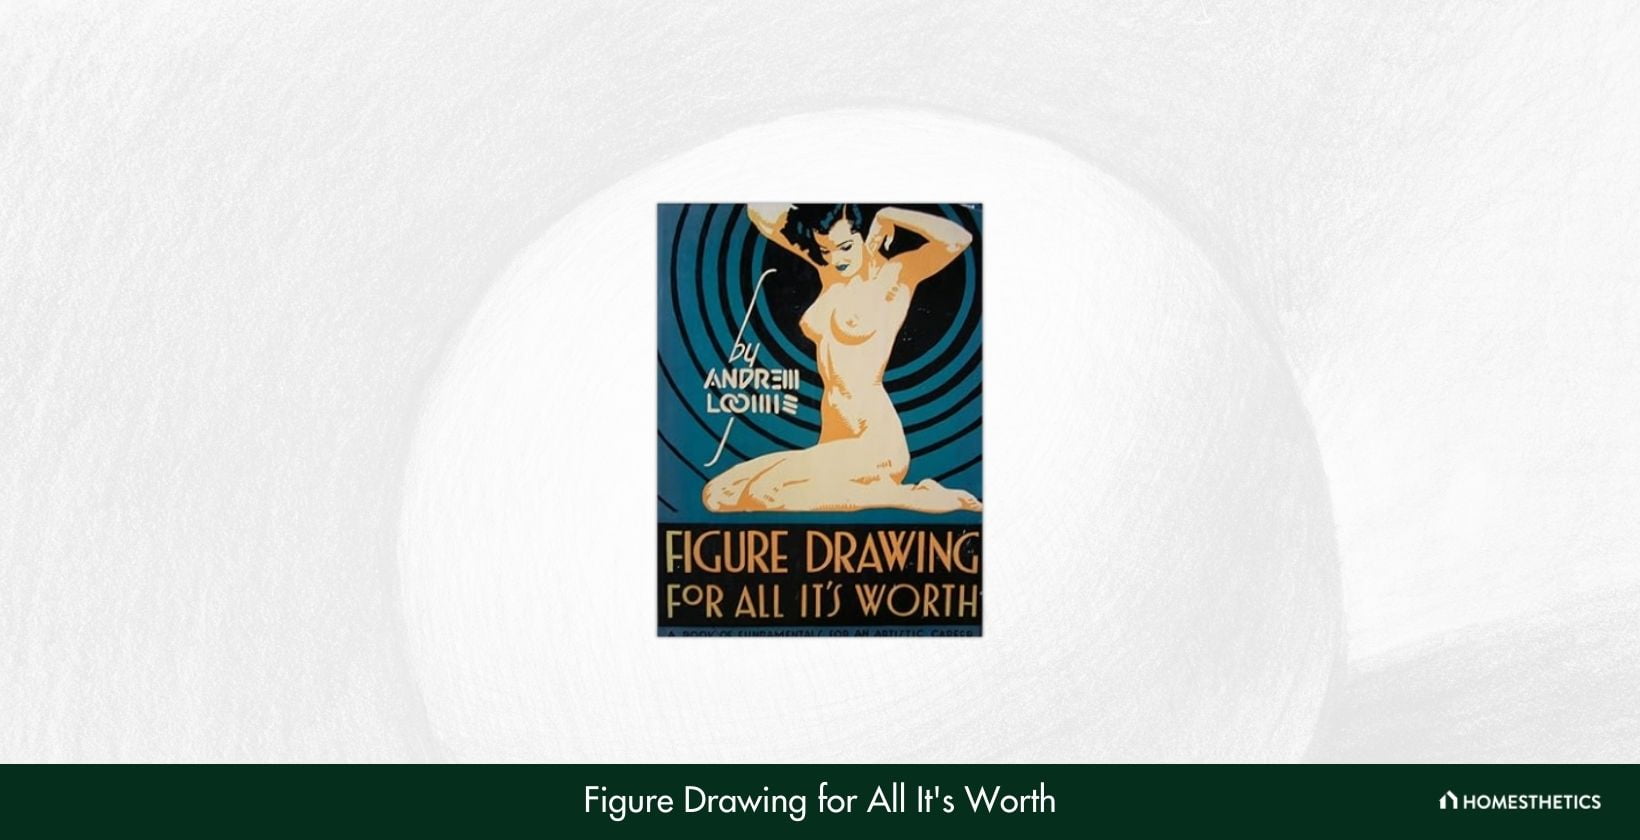 Figure Drawing for All Its Worth by Andrew Loomis